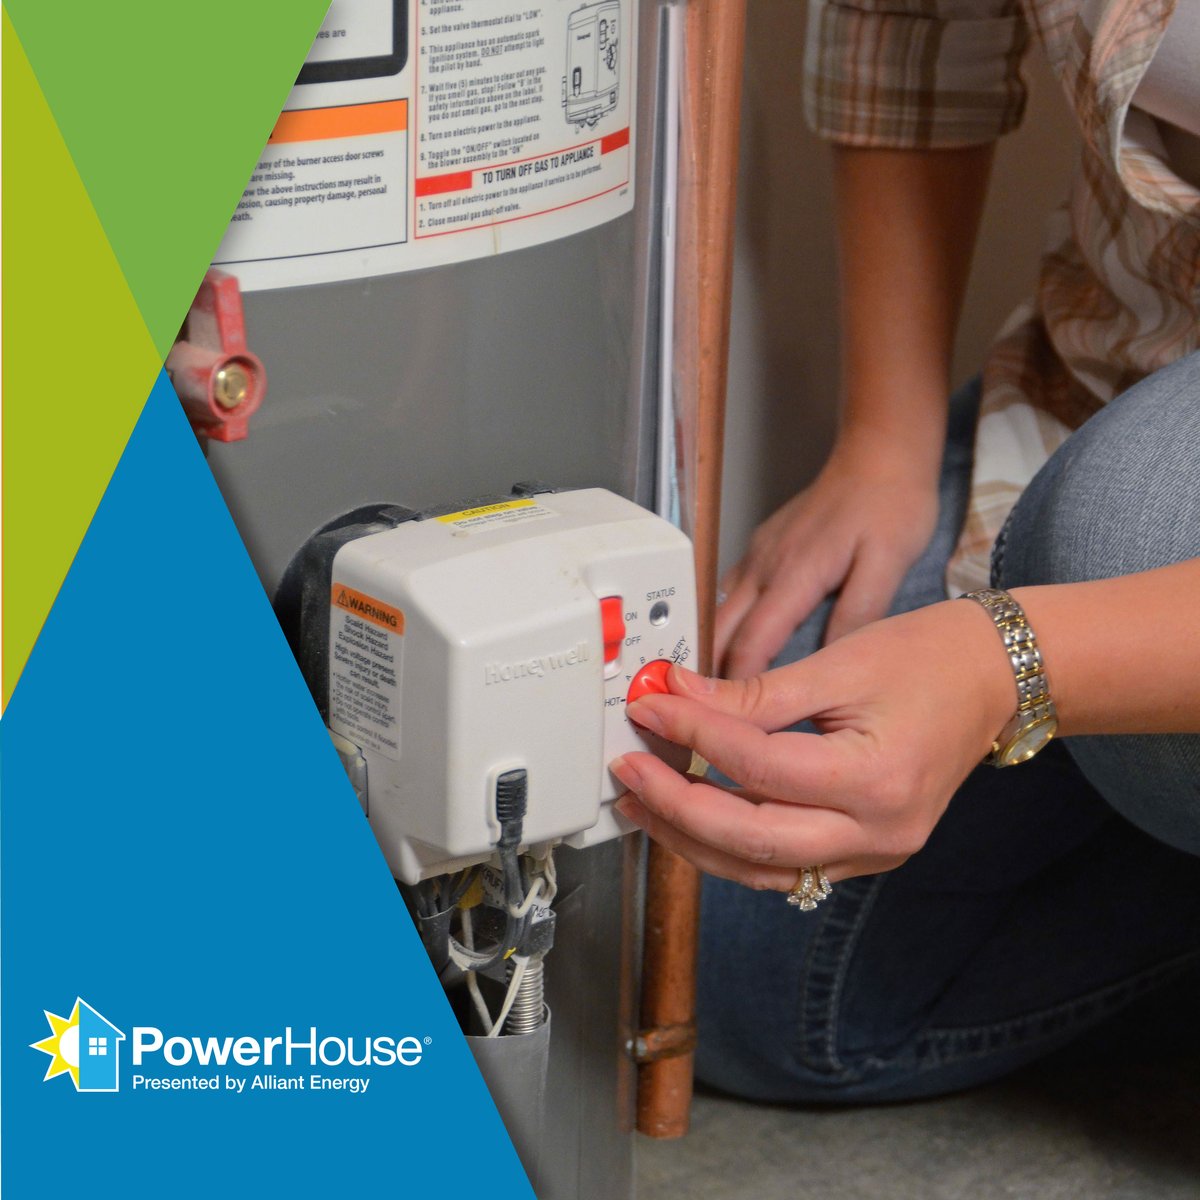 Are you looking for a quick PowerHouse tip? As spring temperatures rise, lower the temperature of your water heater to 120 F. powerhousetv.com